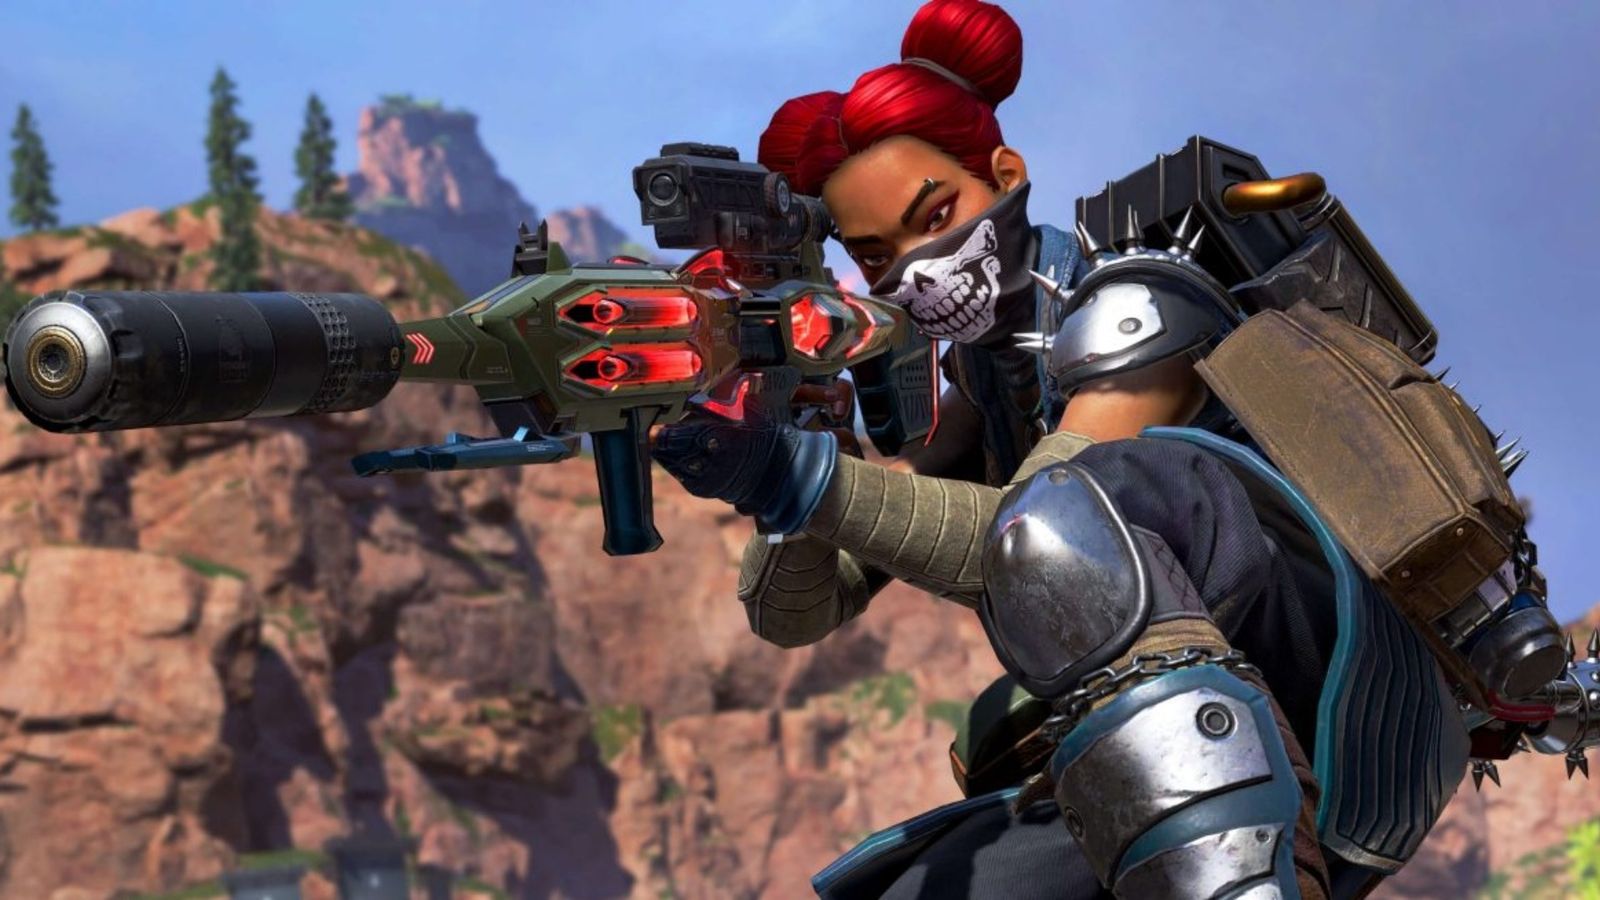 Apex Legends Lifeline using a Sniper Rifle in a Legendary Skin in Kings Canyon